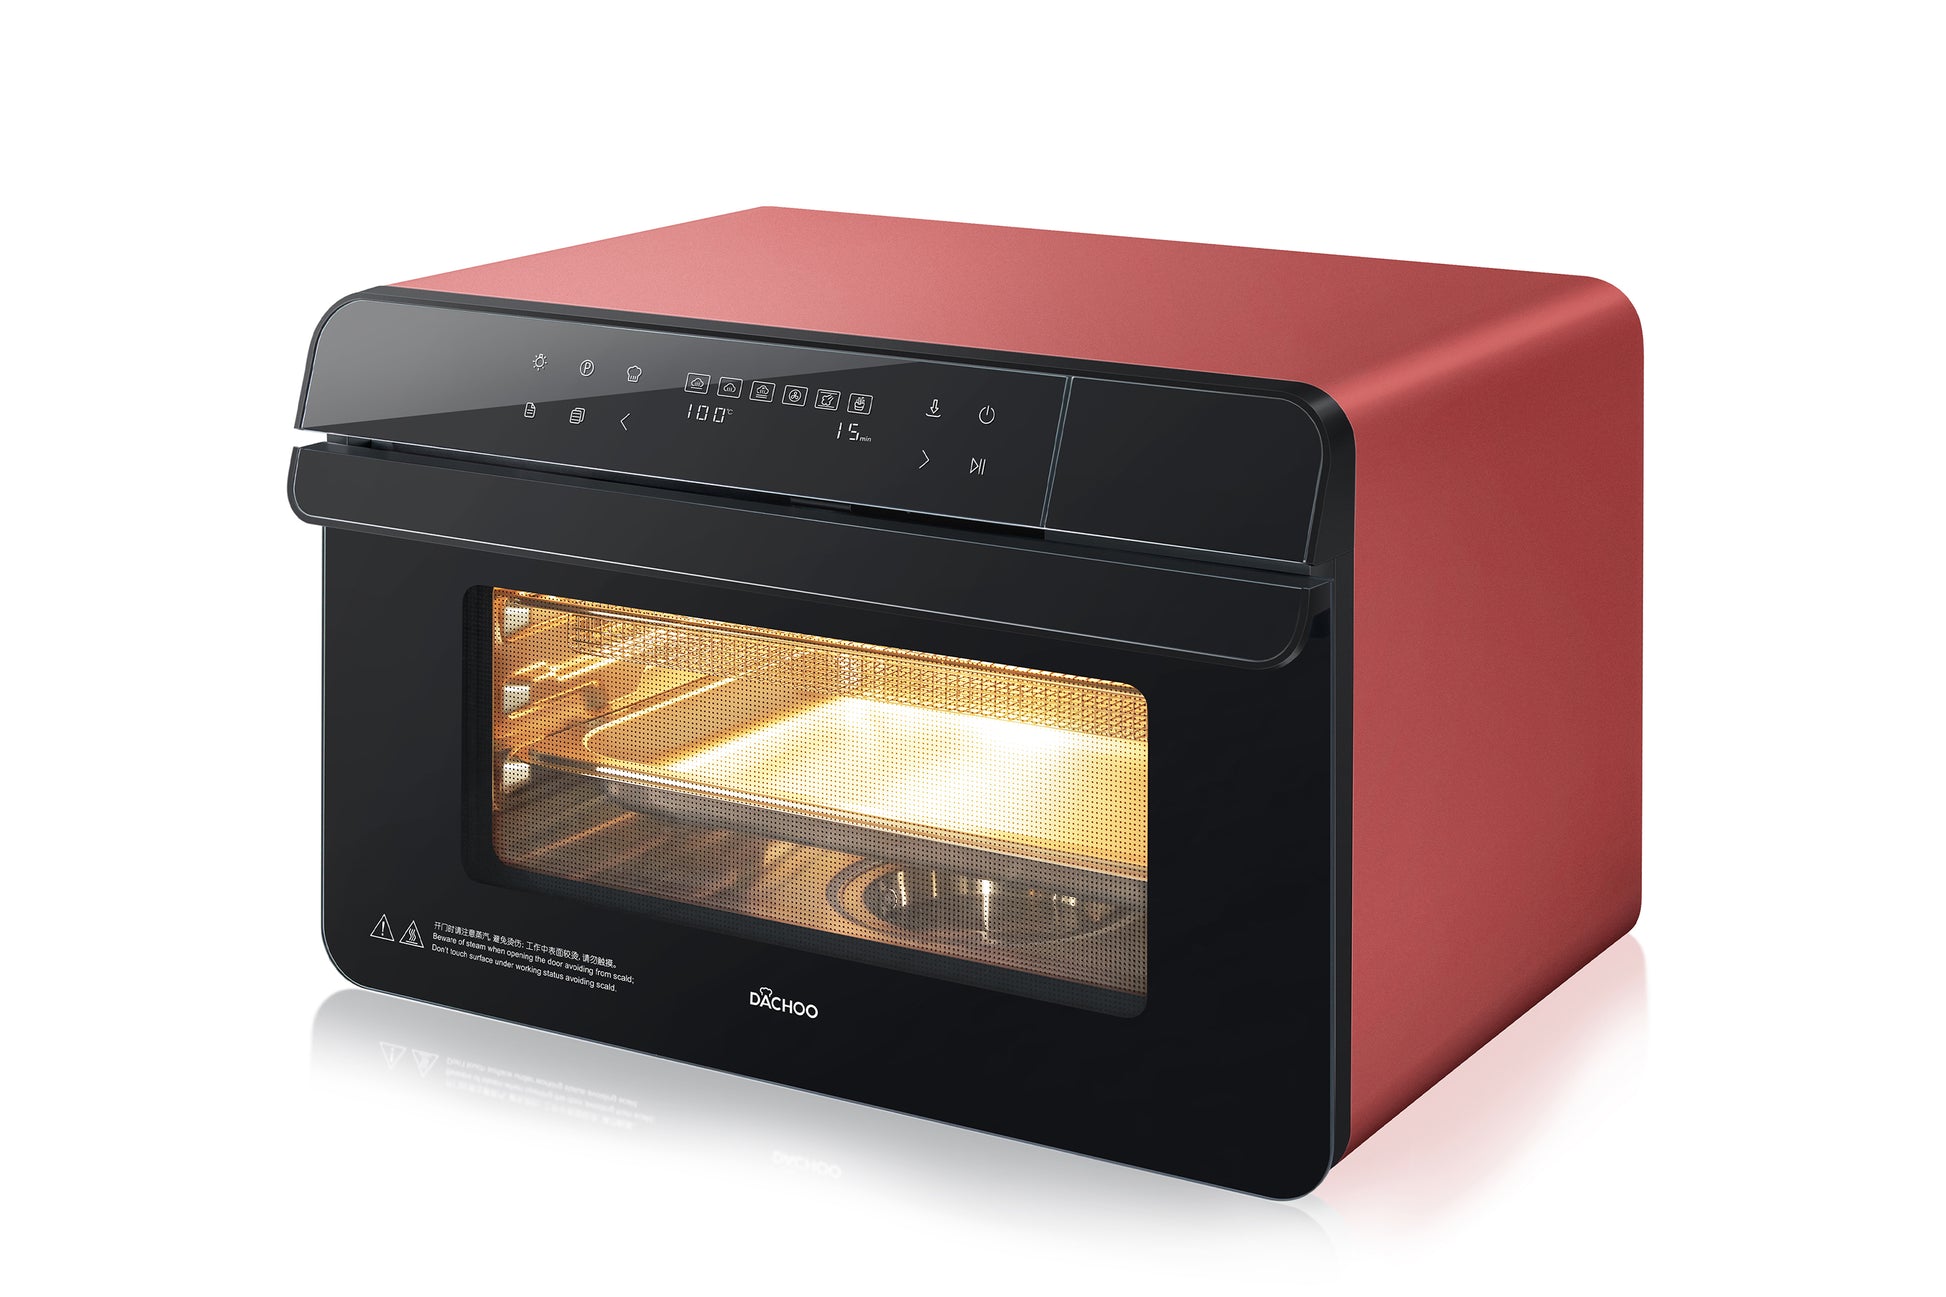 ROBAM  R-Box Red Convection Toaster Oven with Rotisserie (1800-Watt) CT763R